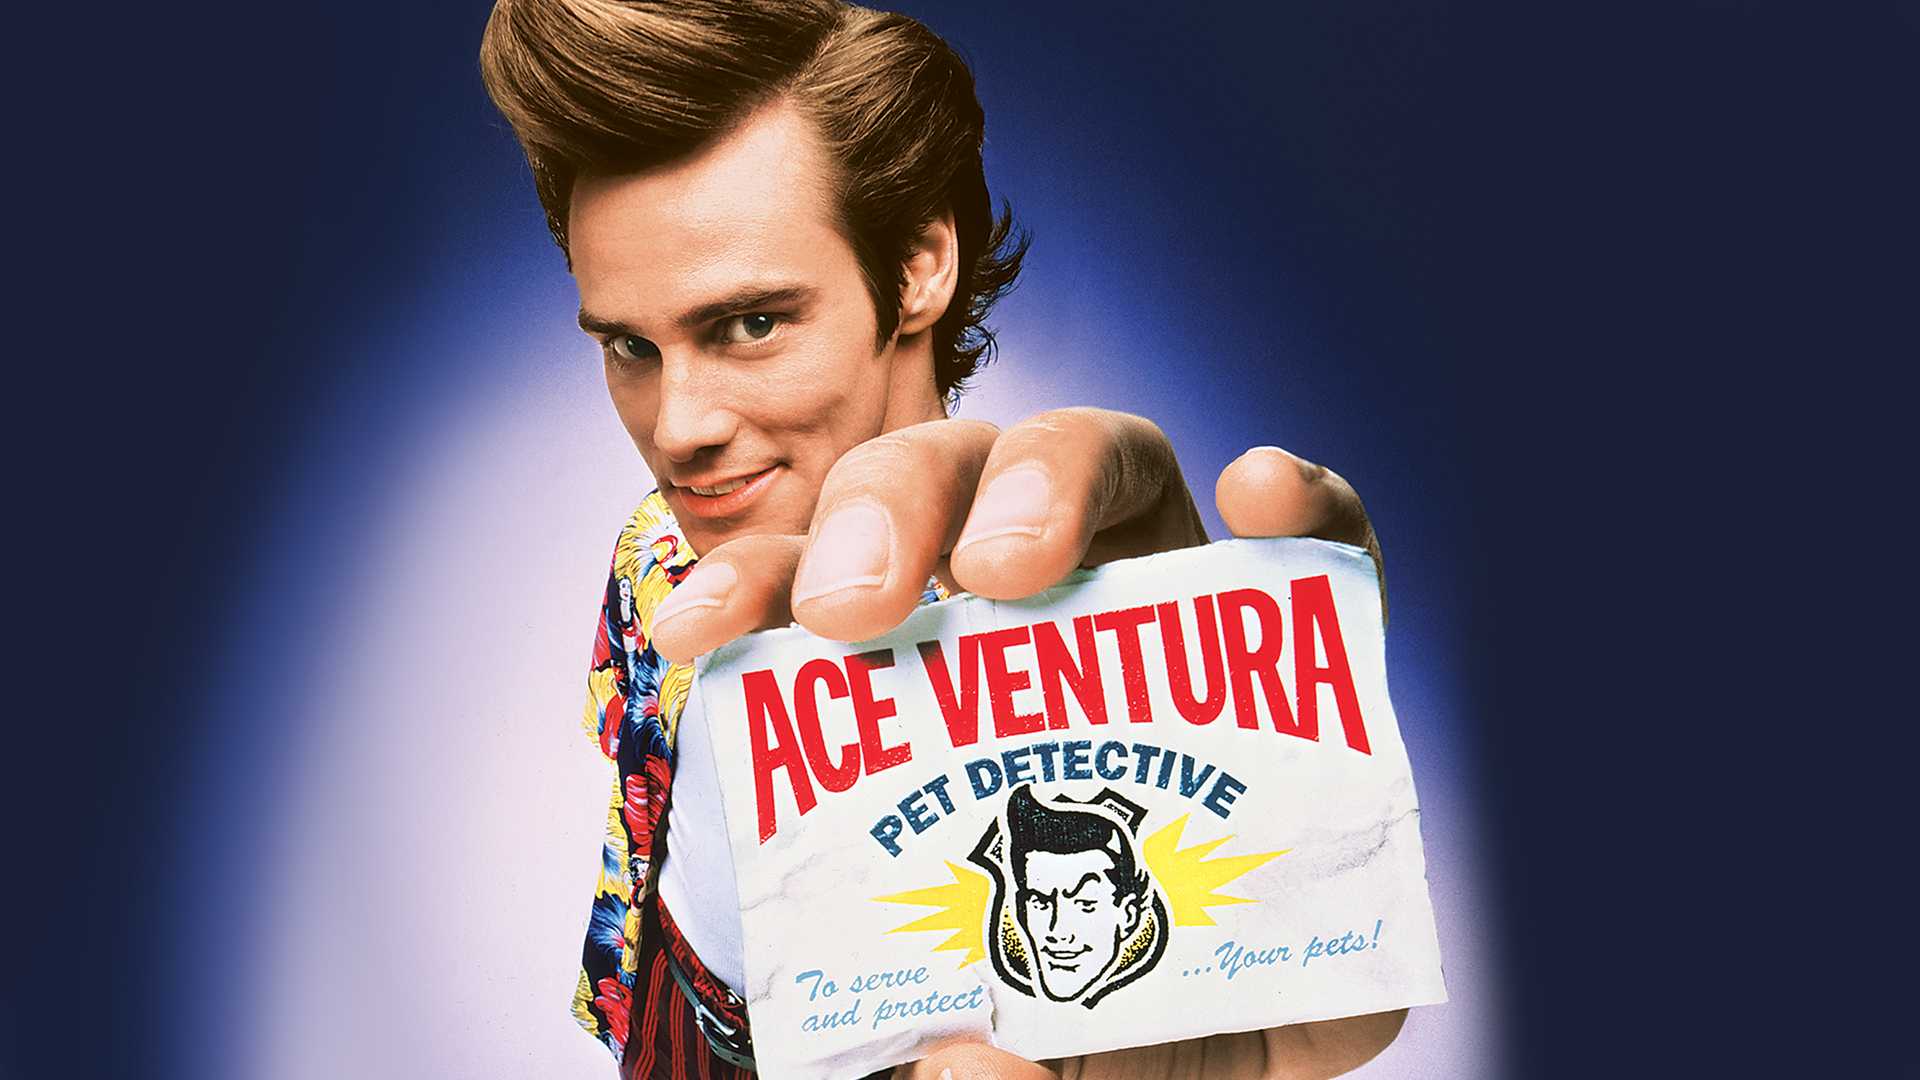 ace-ventura-3-will-jim-carrey-s-epic-return-dazzle-or-disappoint-fans